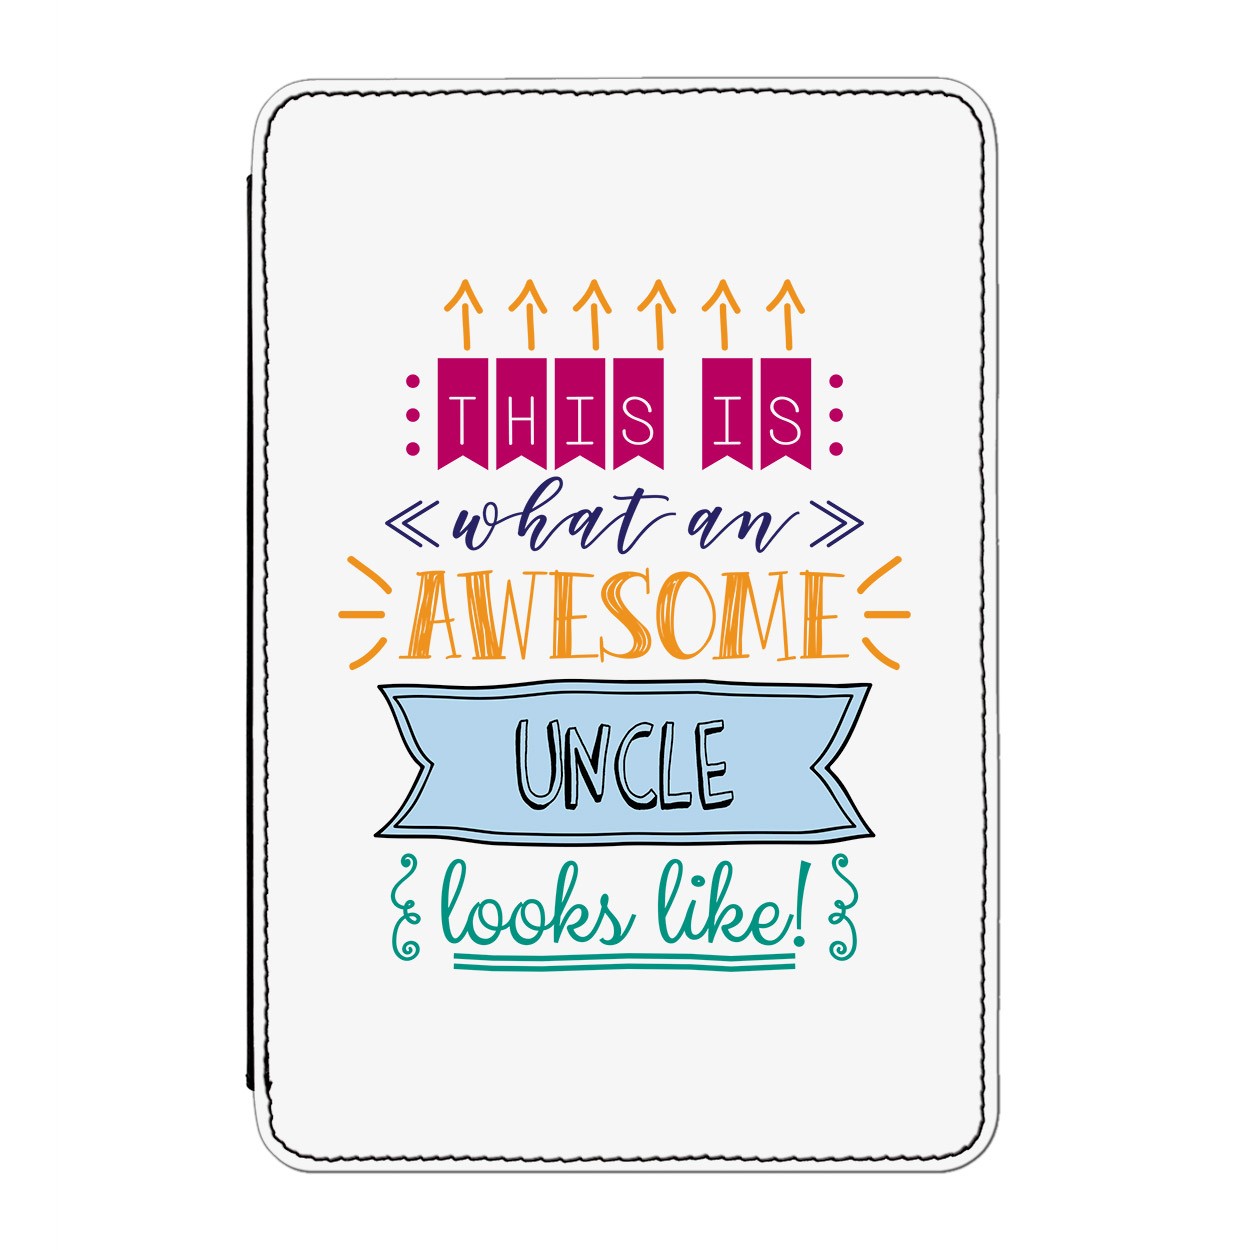 This Is What An Awesome Uncle Looks Like Case Cover for Kindle 6" E-reader